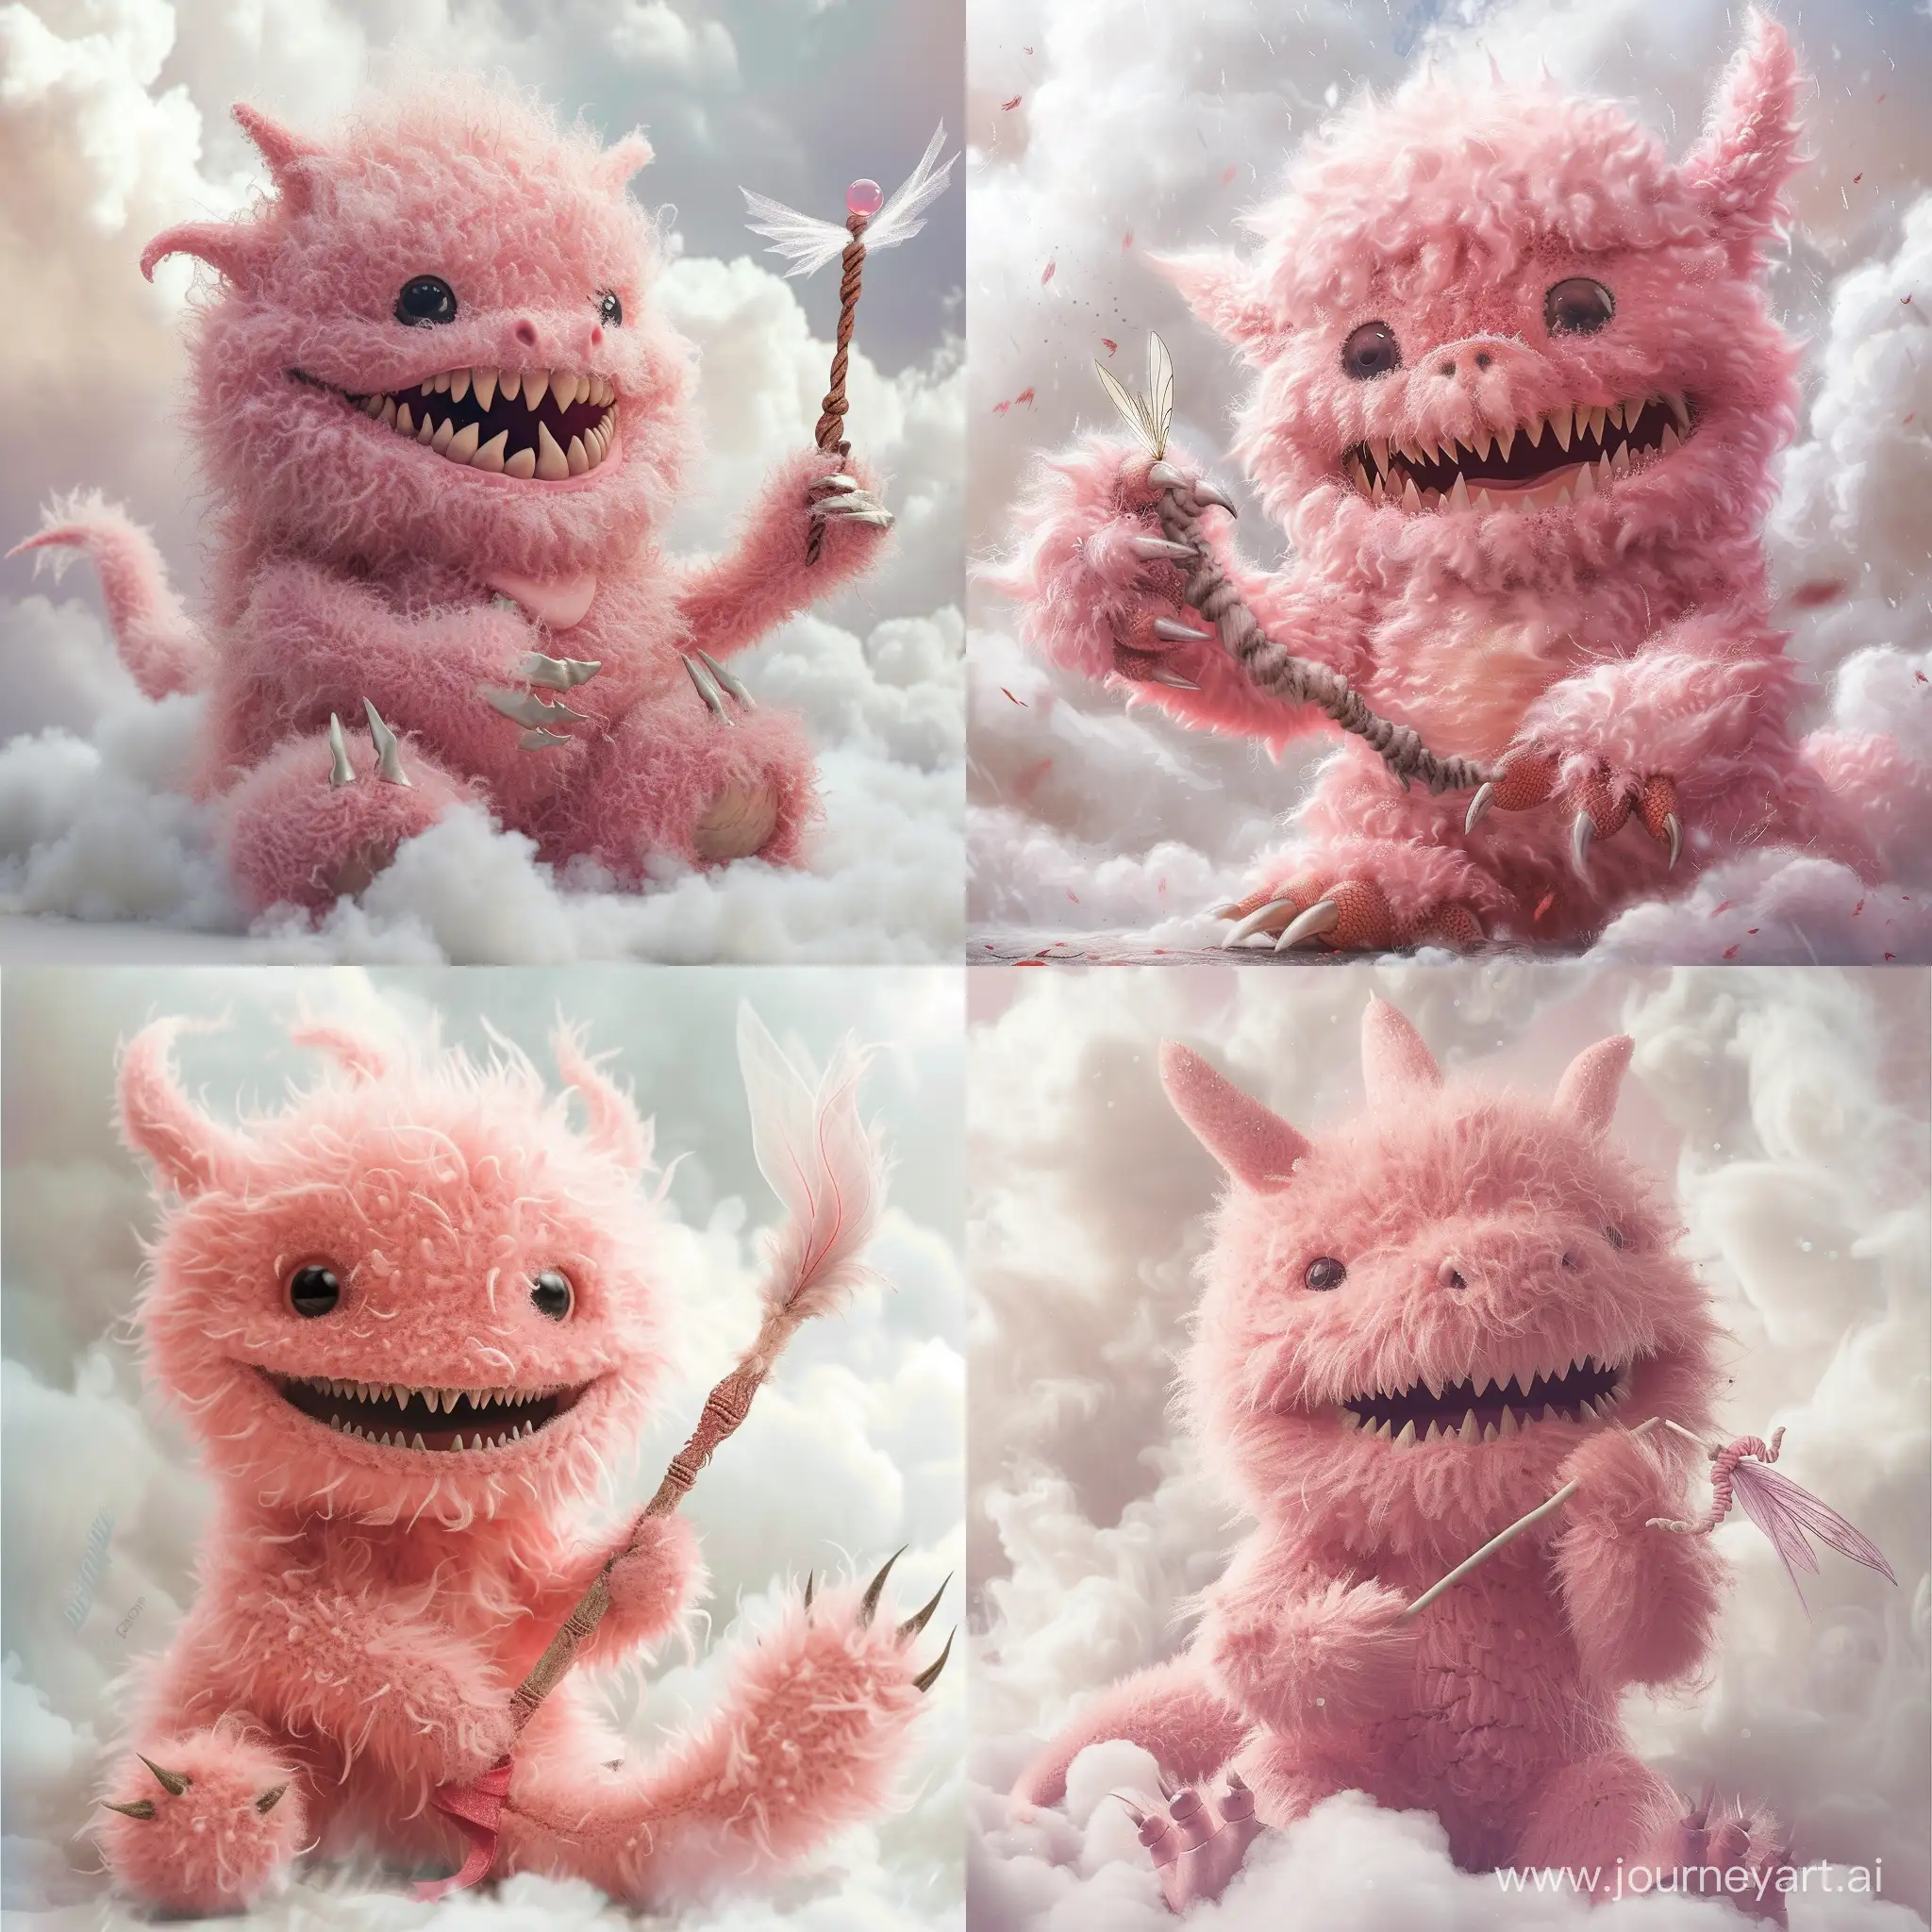 A cute pink dragon, plush, with no one.The dragon has fur, the background is a white and thick cloud, the dragon is a little cuter, holding a fairy wand with its claws, grinning.The dragon is covered in a lot of fluff, its mouth grinning with bared teeth, and one of its feet lifted up happily.